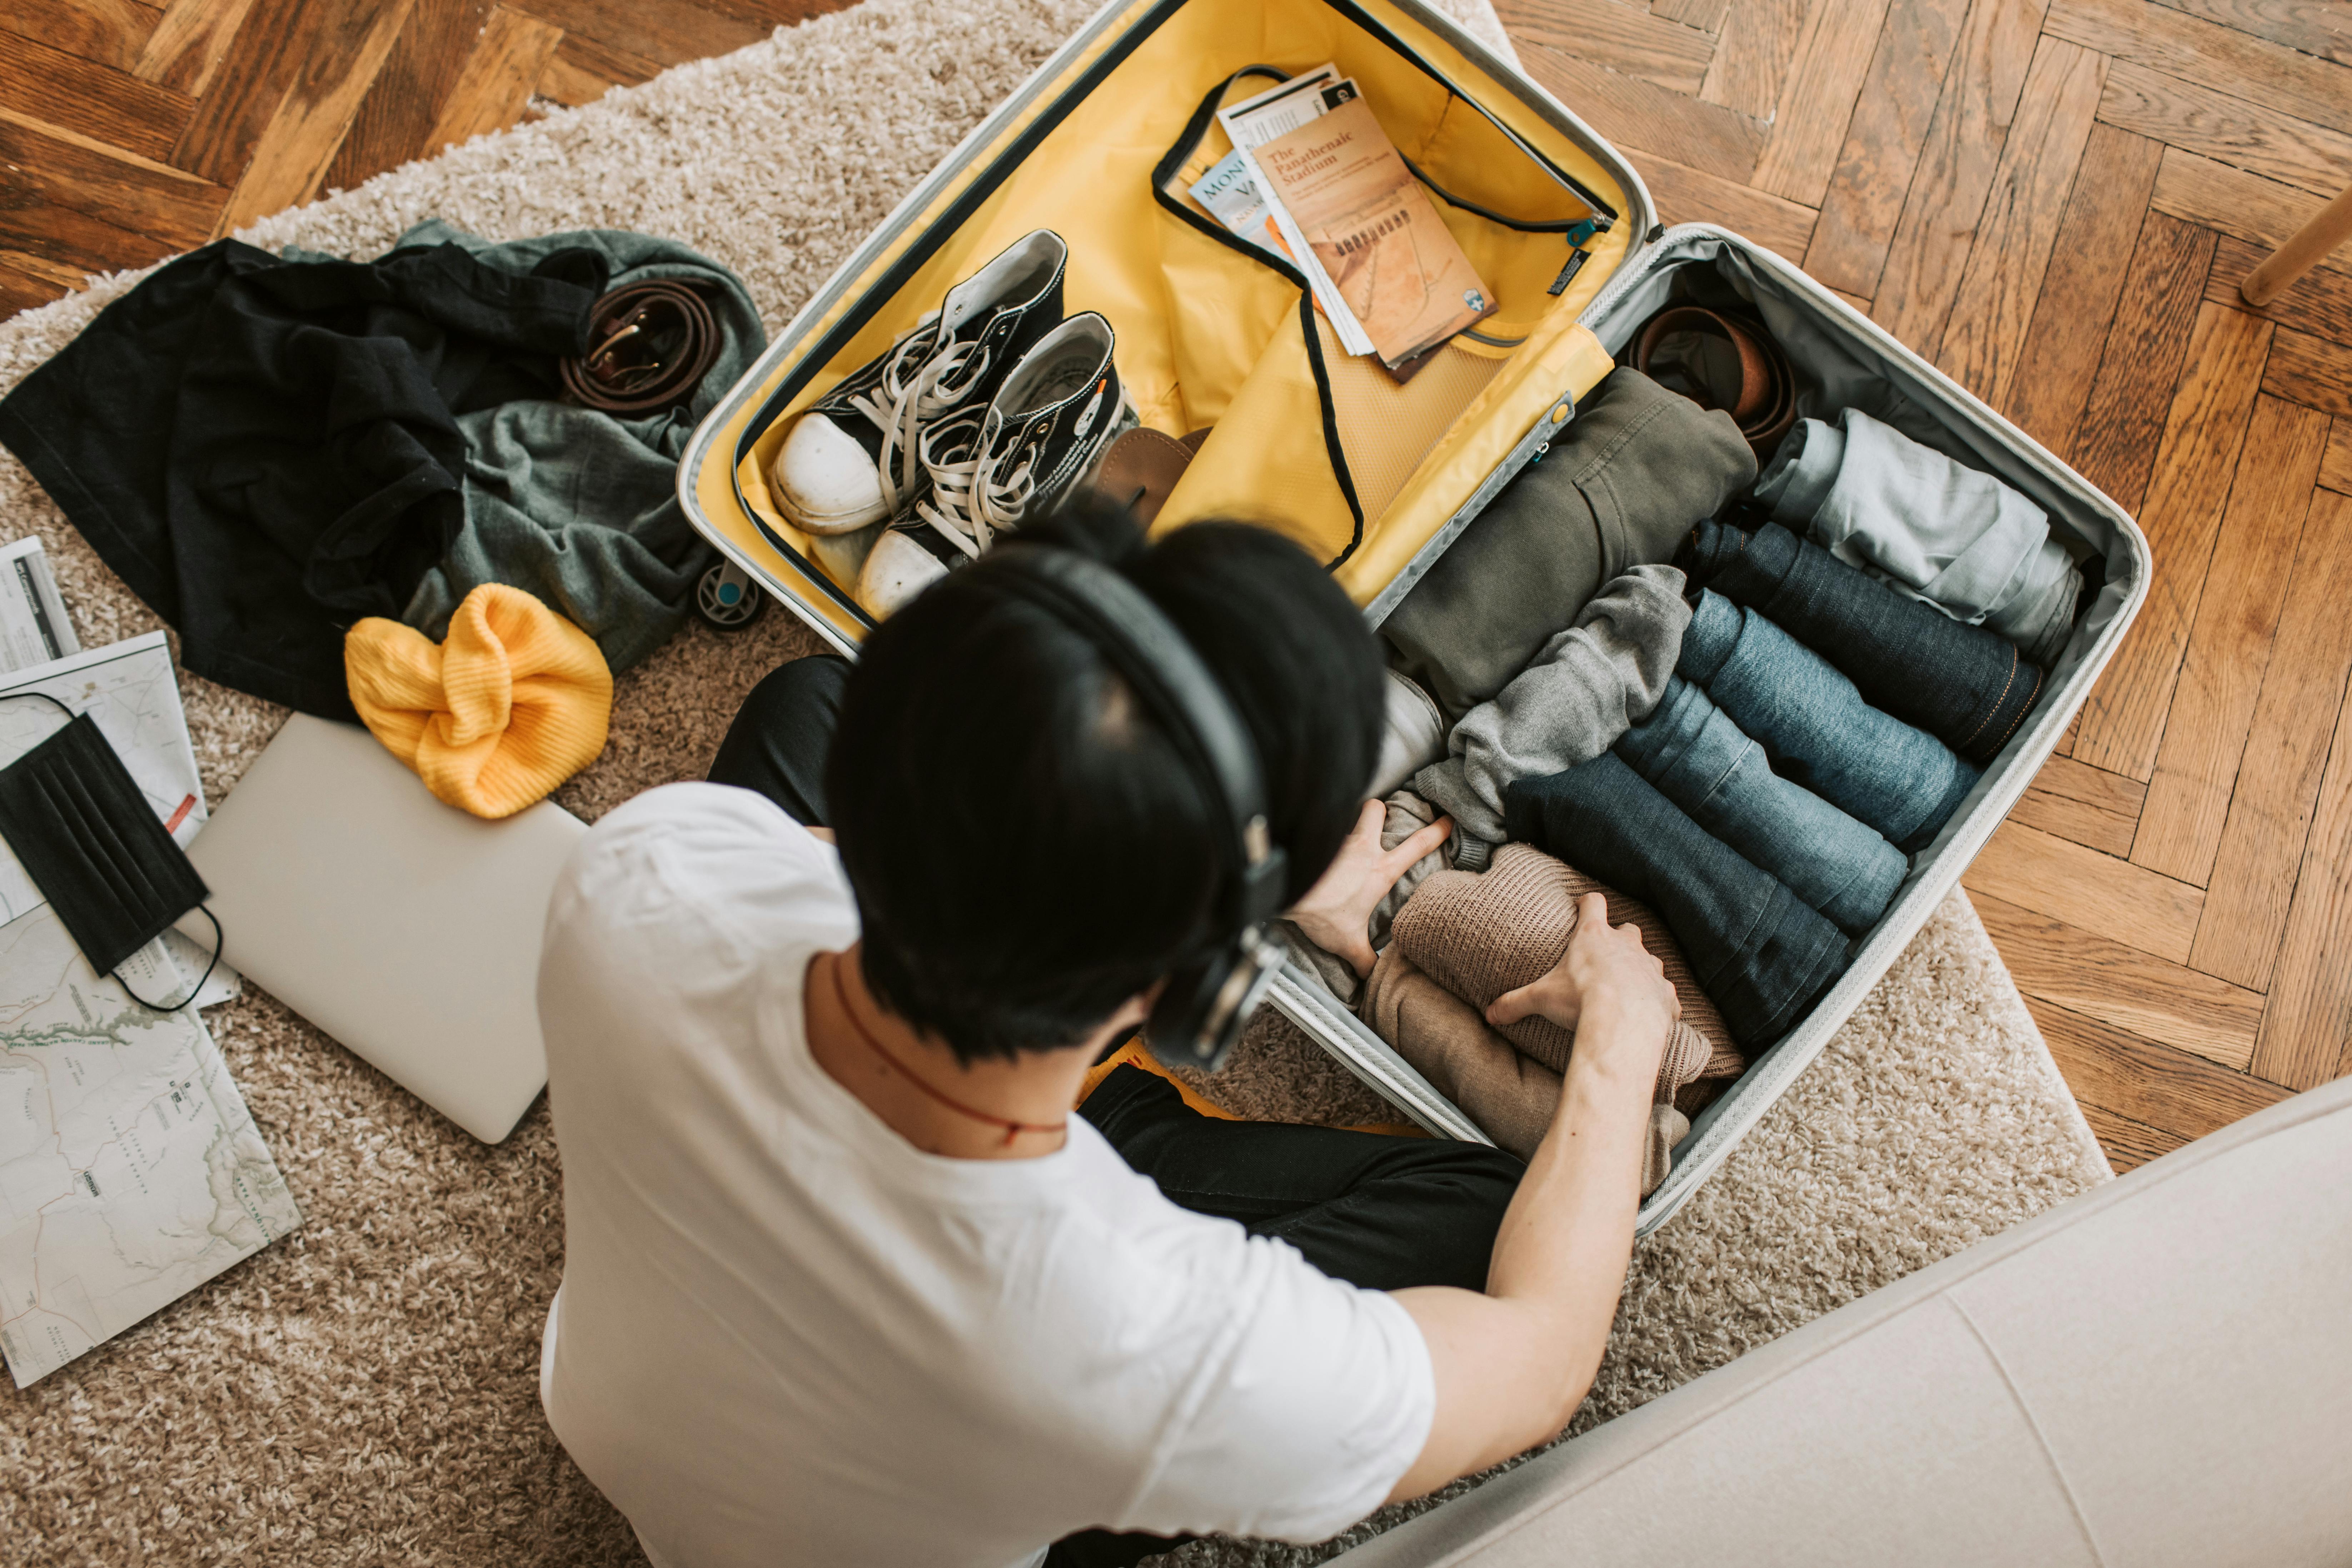 A man wearing headsets while packing his bag | Source: Pexels